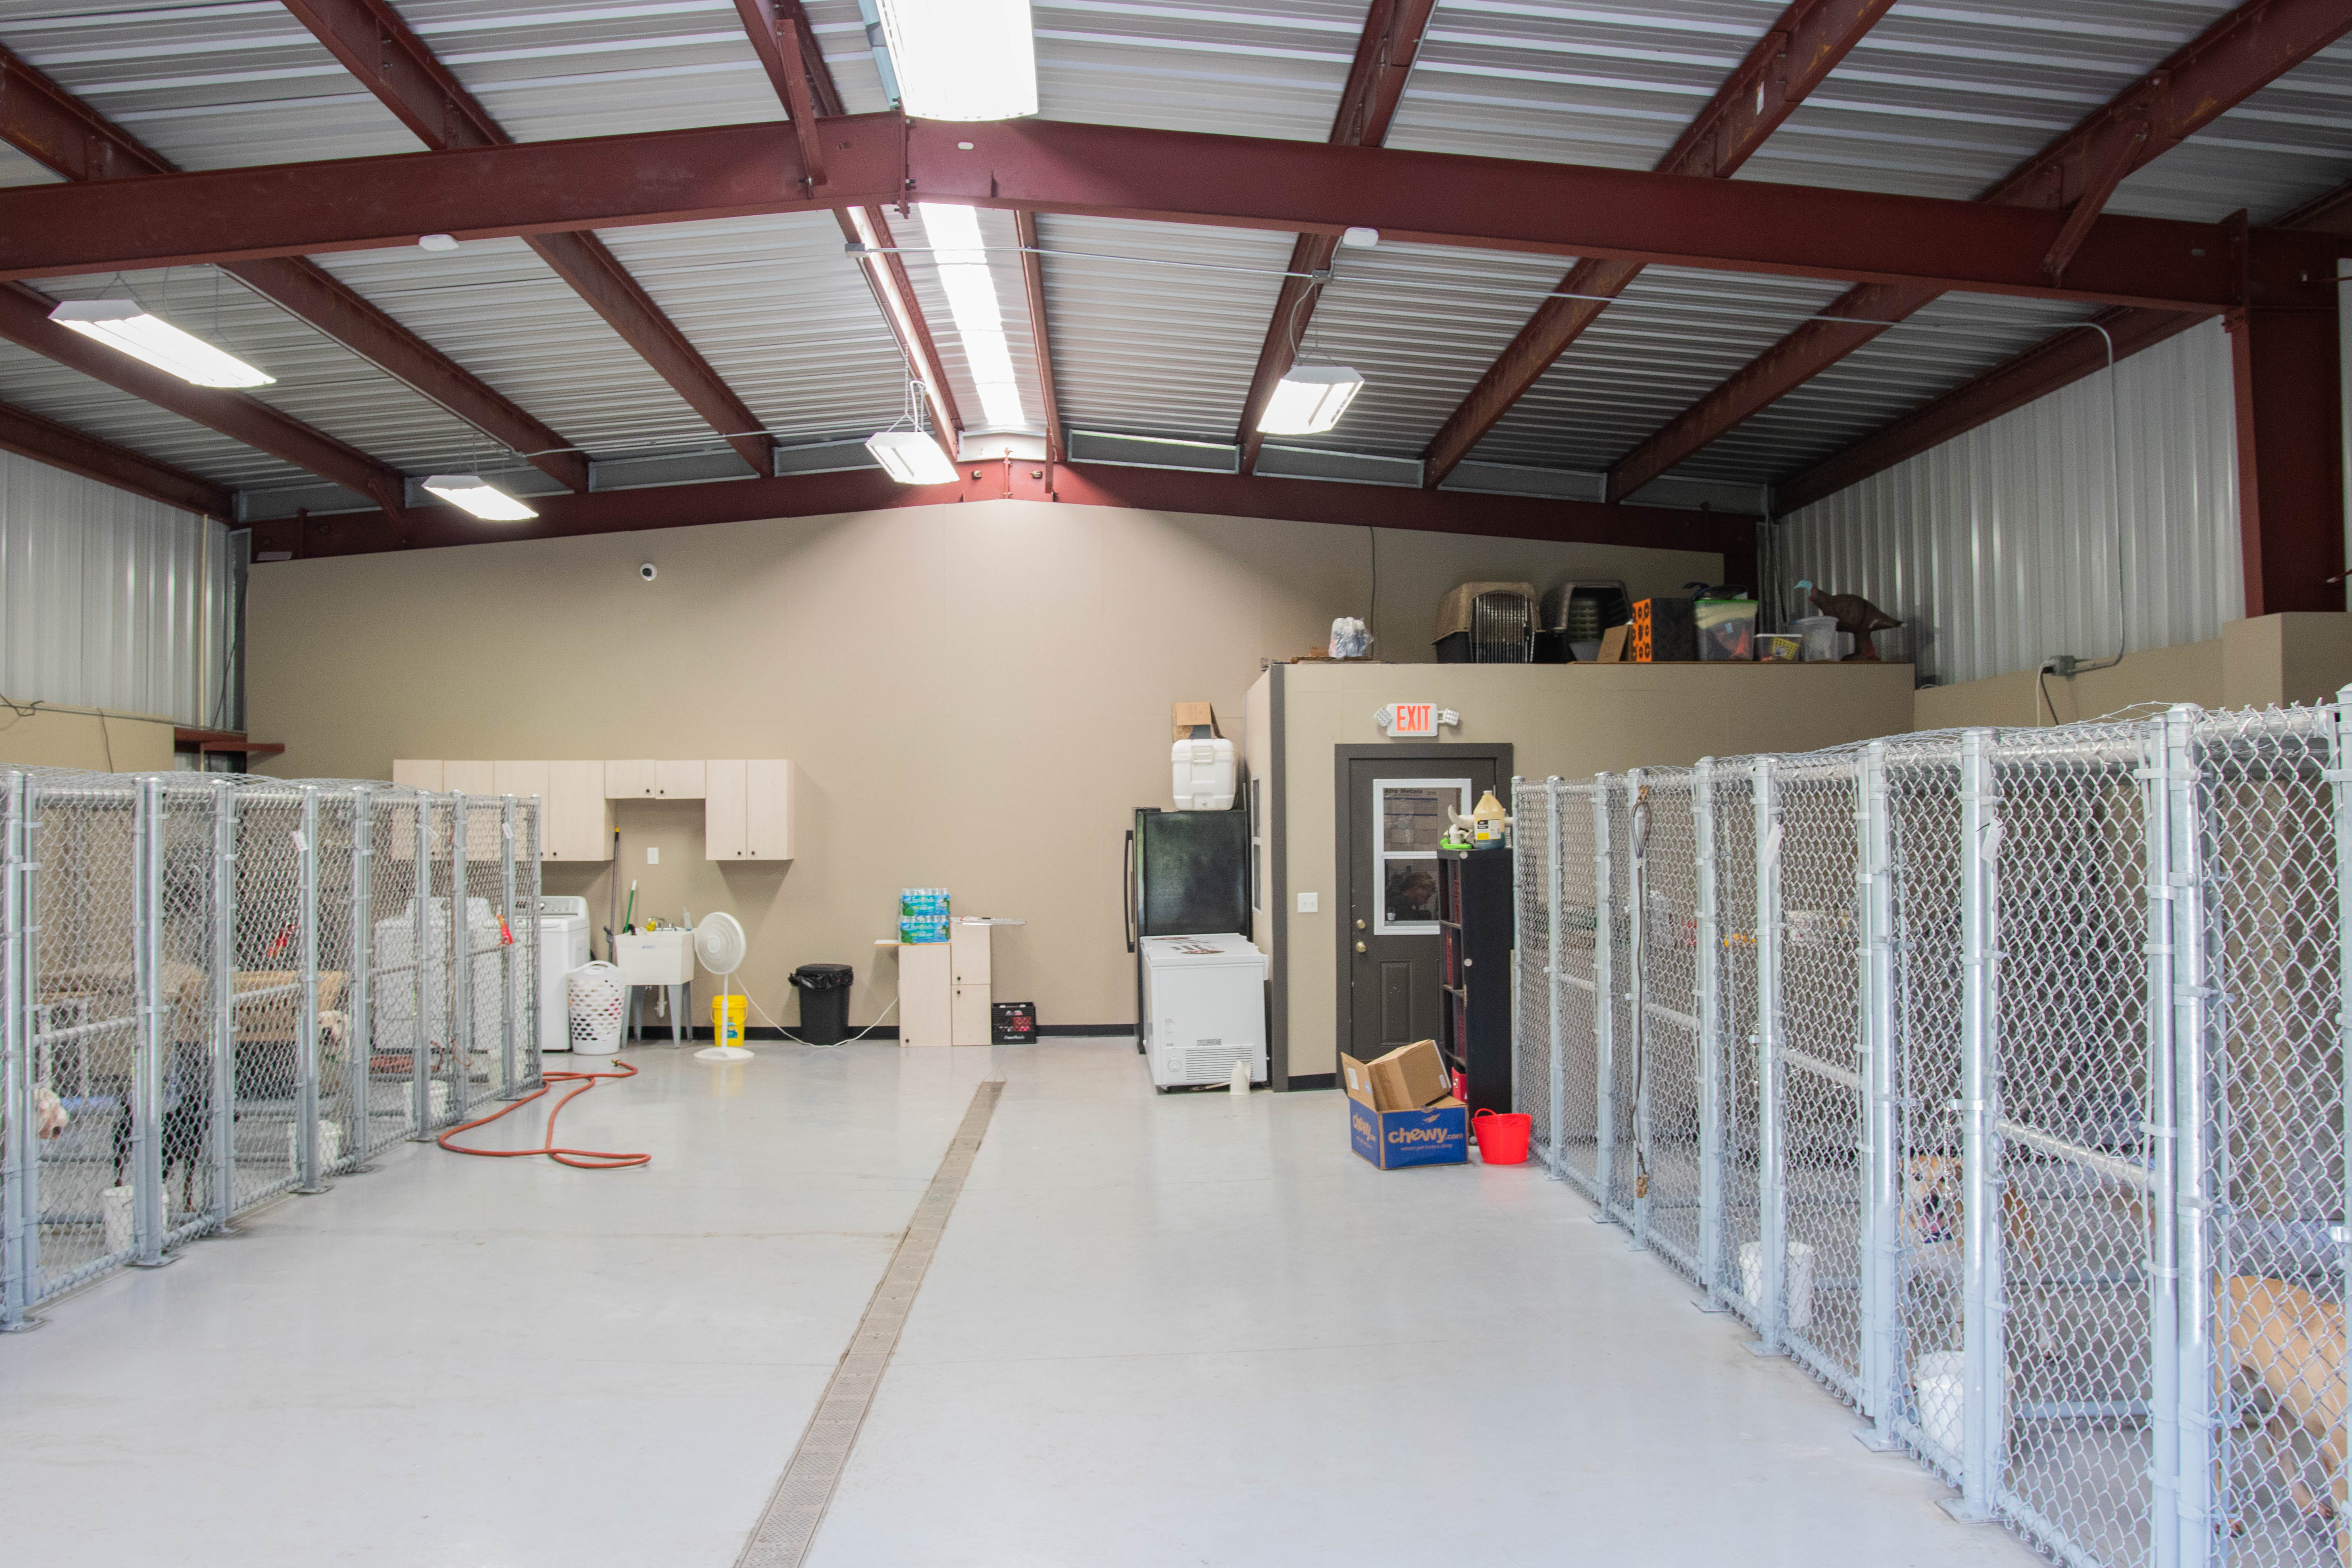 Dog kennel buildings are the ideal low cost, low maintenance solution